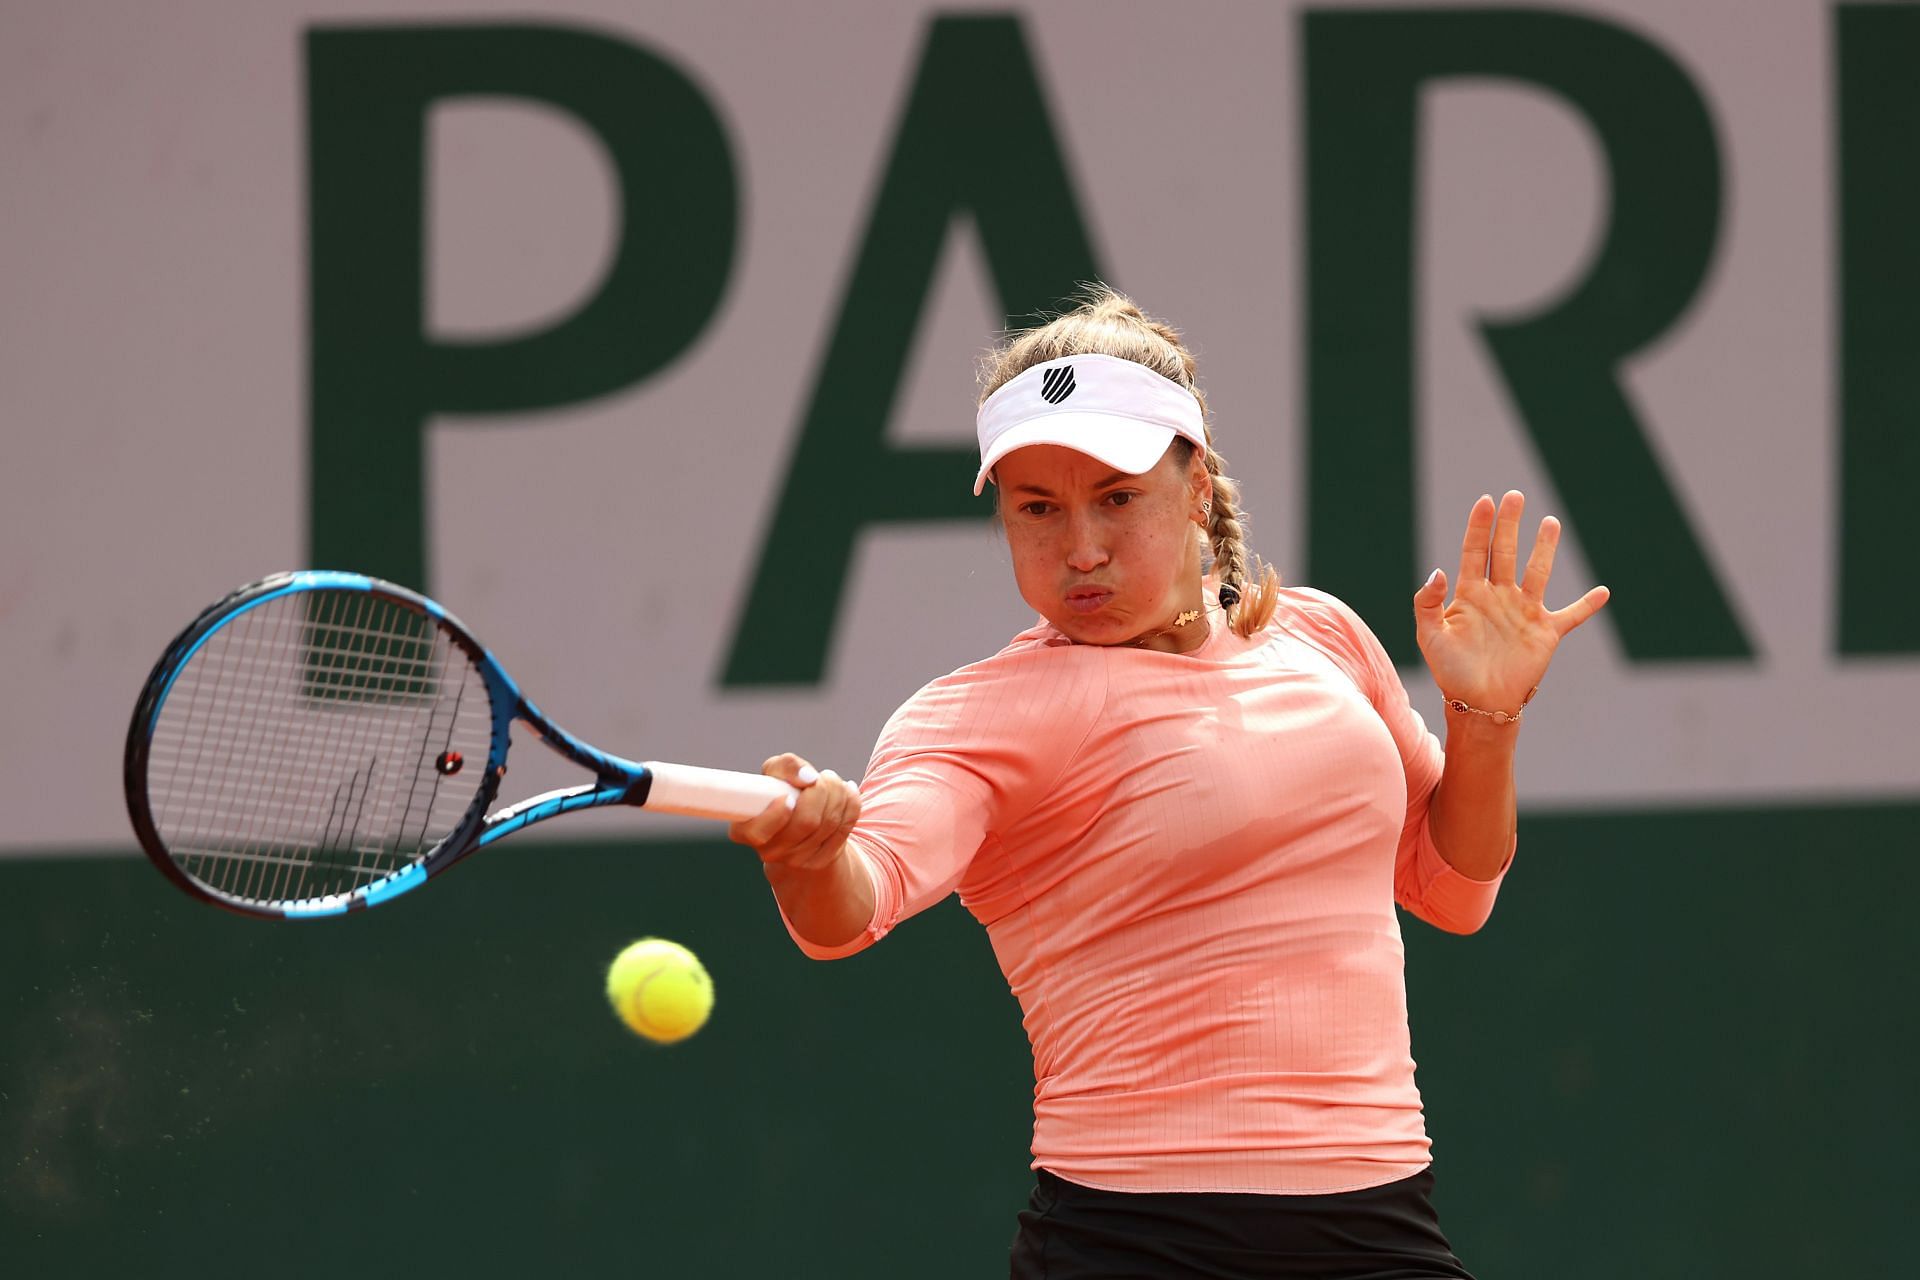 Yulia Putinseva is the defending champion, having lifted the trophy 12 months ago